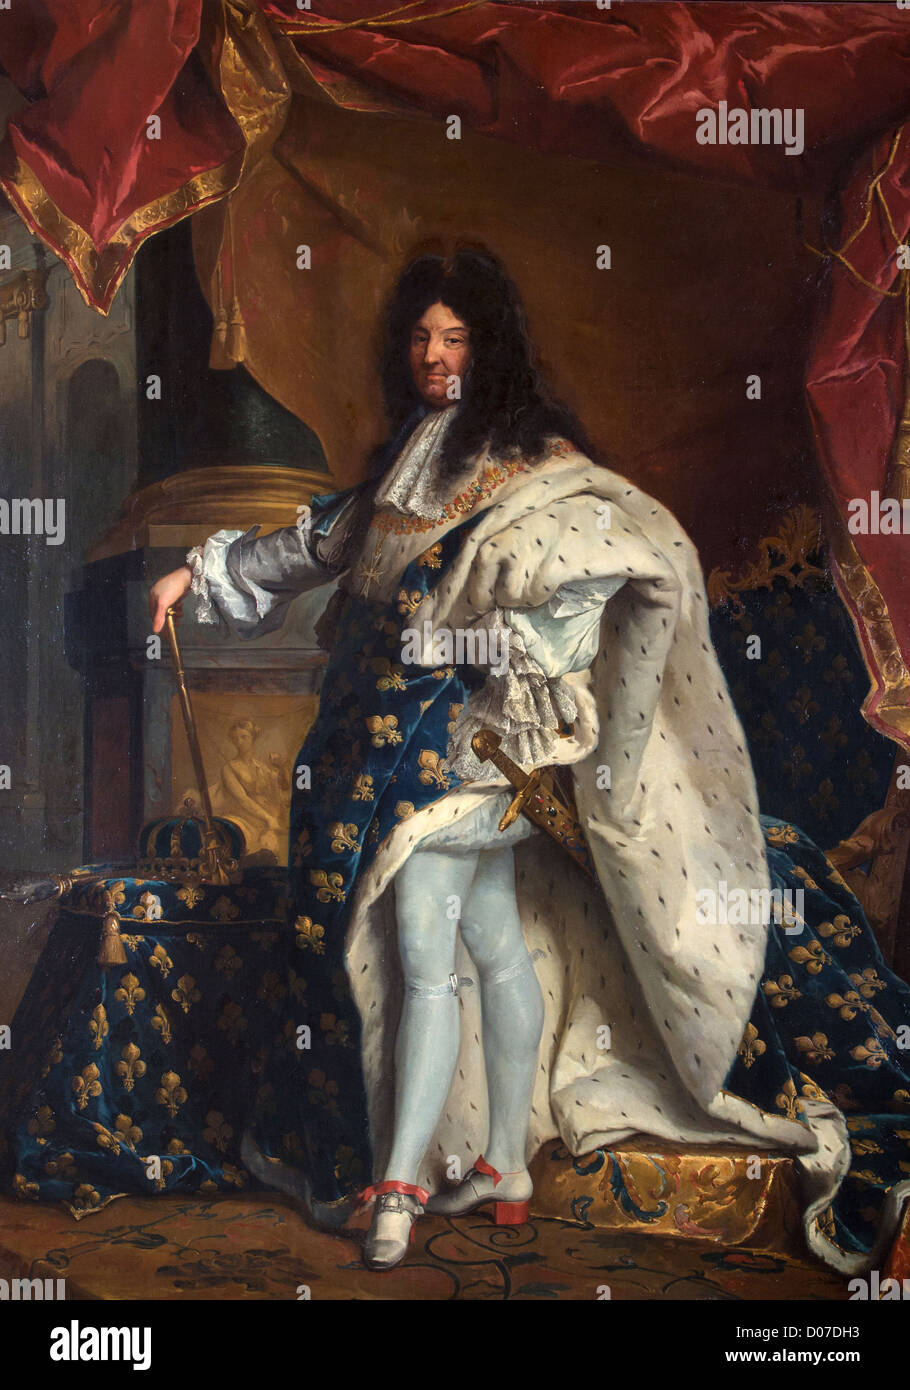 PORTRAIT LOUIS XIV (1638-1715) KING FRANCE IN CORONATION COSTUME FRAME COAT ARMS FRANCE NAVARRE PAINTING FROM 1867 BASED ON Stock Photo